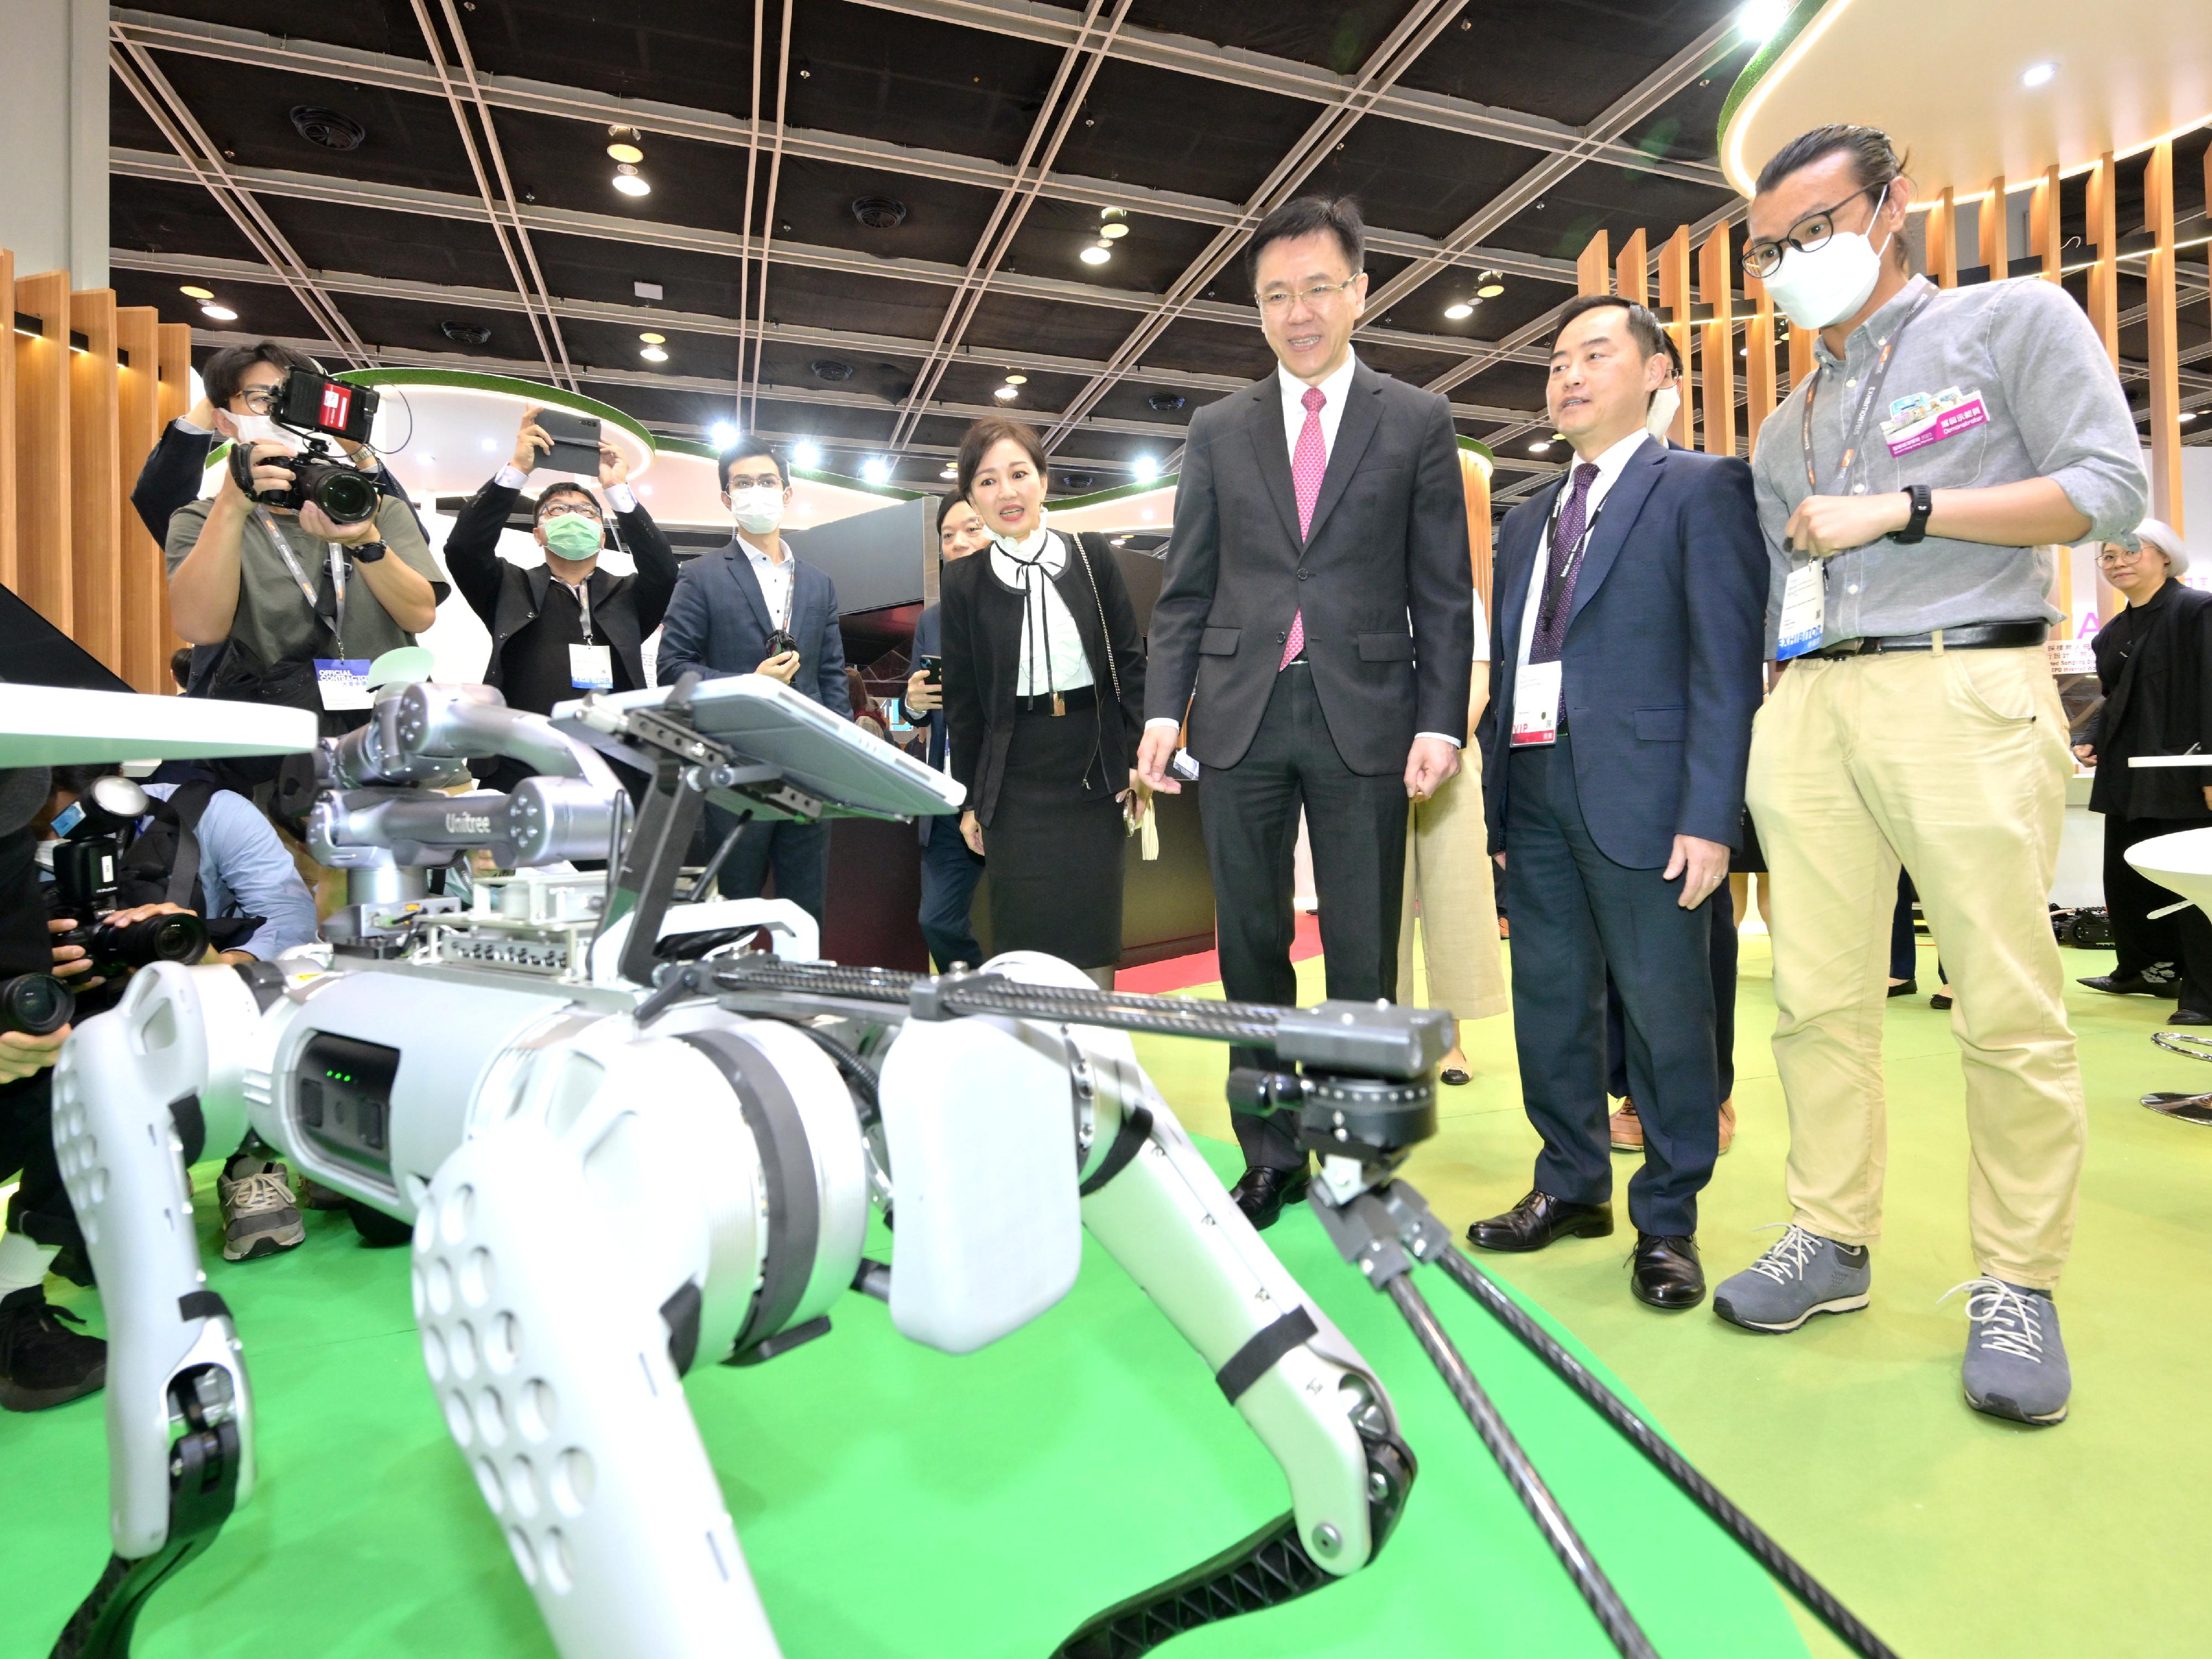 The Secretary for Innovation, Technology and Industry, Professor Sun Dong (third right), visited the Smart Hong Kong Pavilion at InnoEX today (April 12) and was briefed on the Environmental Protection Department’s Unmanned Ground Penetrating Radar Robot Dog. Looking on is the Acting Government Chief Information Officer, Mr Tony Wong (second right).